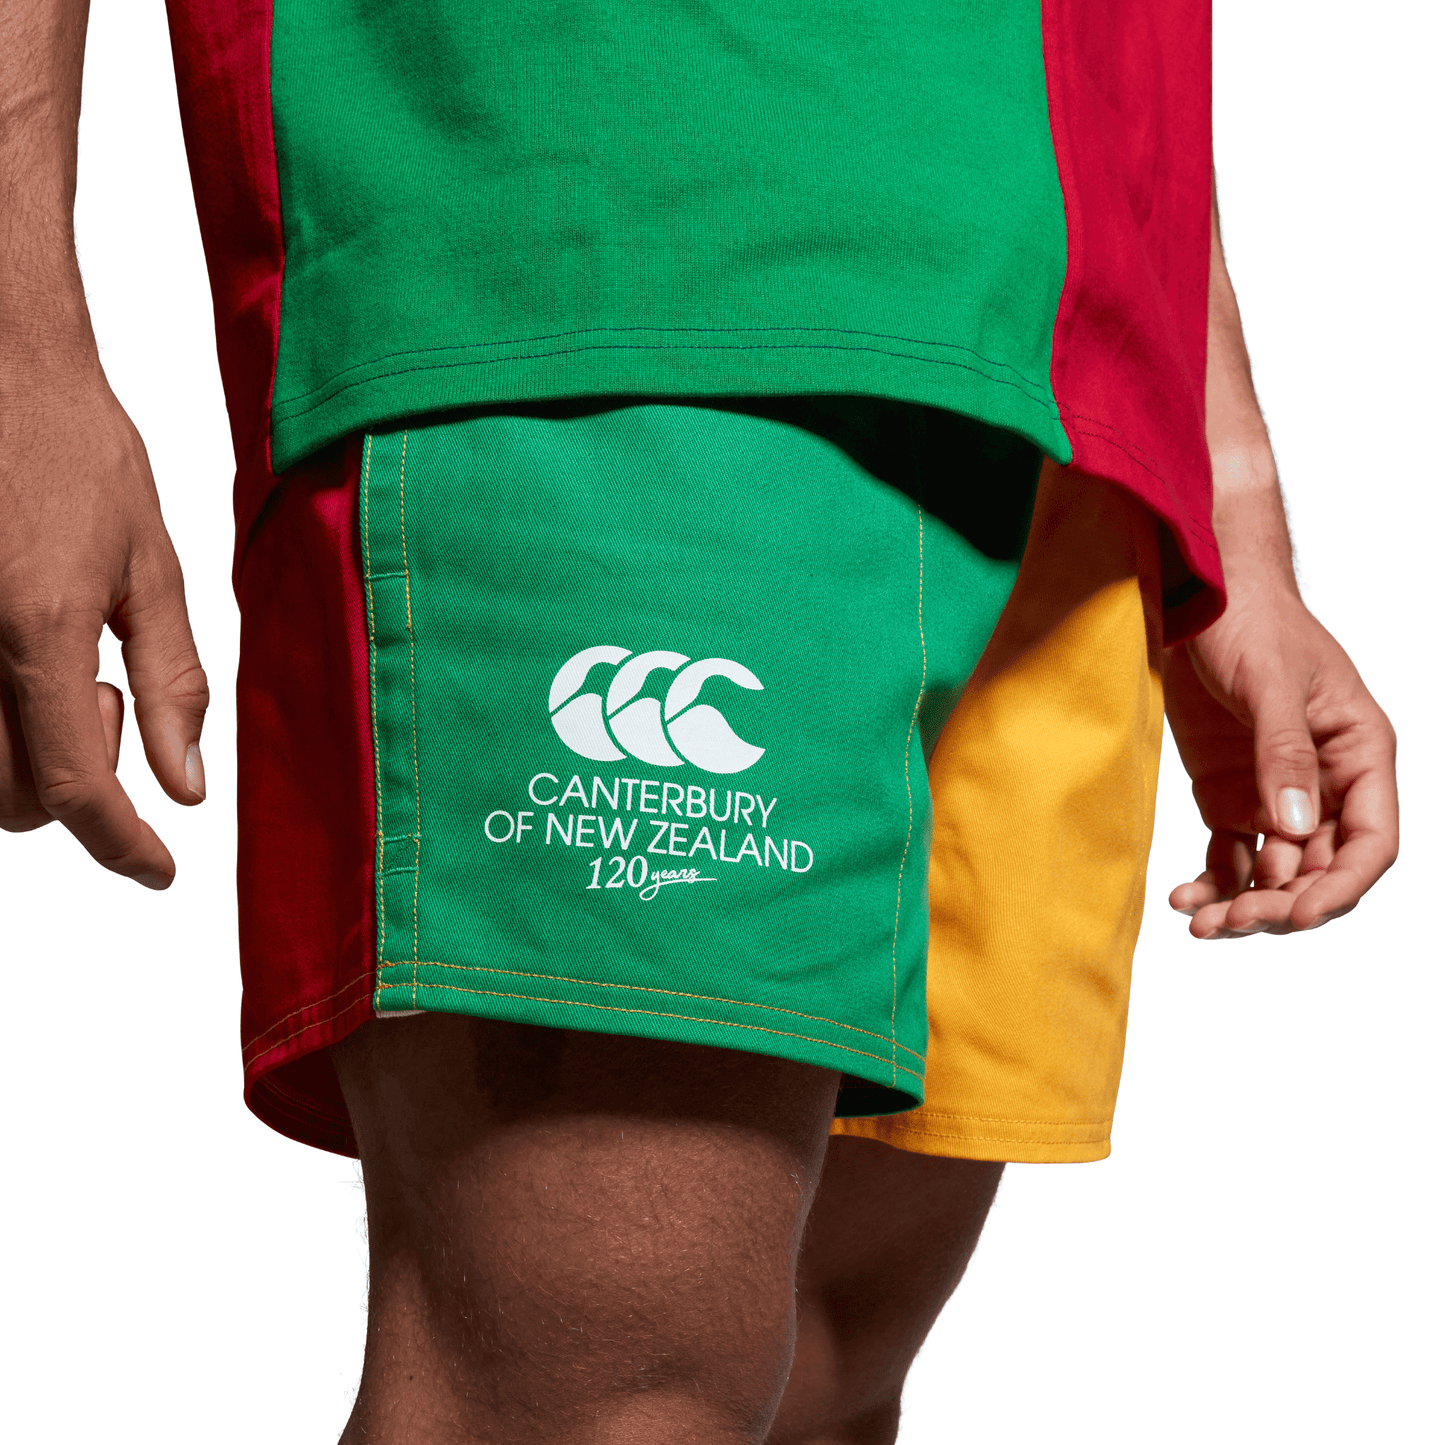 Limited-Edition Canterbury Rugby Shorts in AU Emerald. A part of the new 120 Years of Canterbury clothing range.